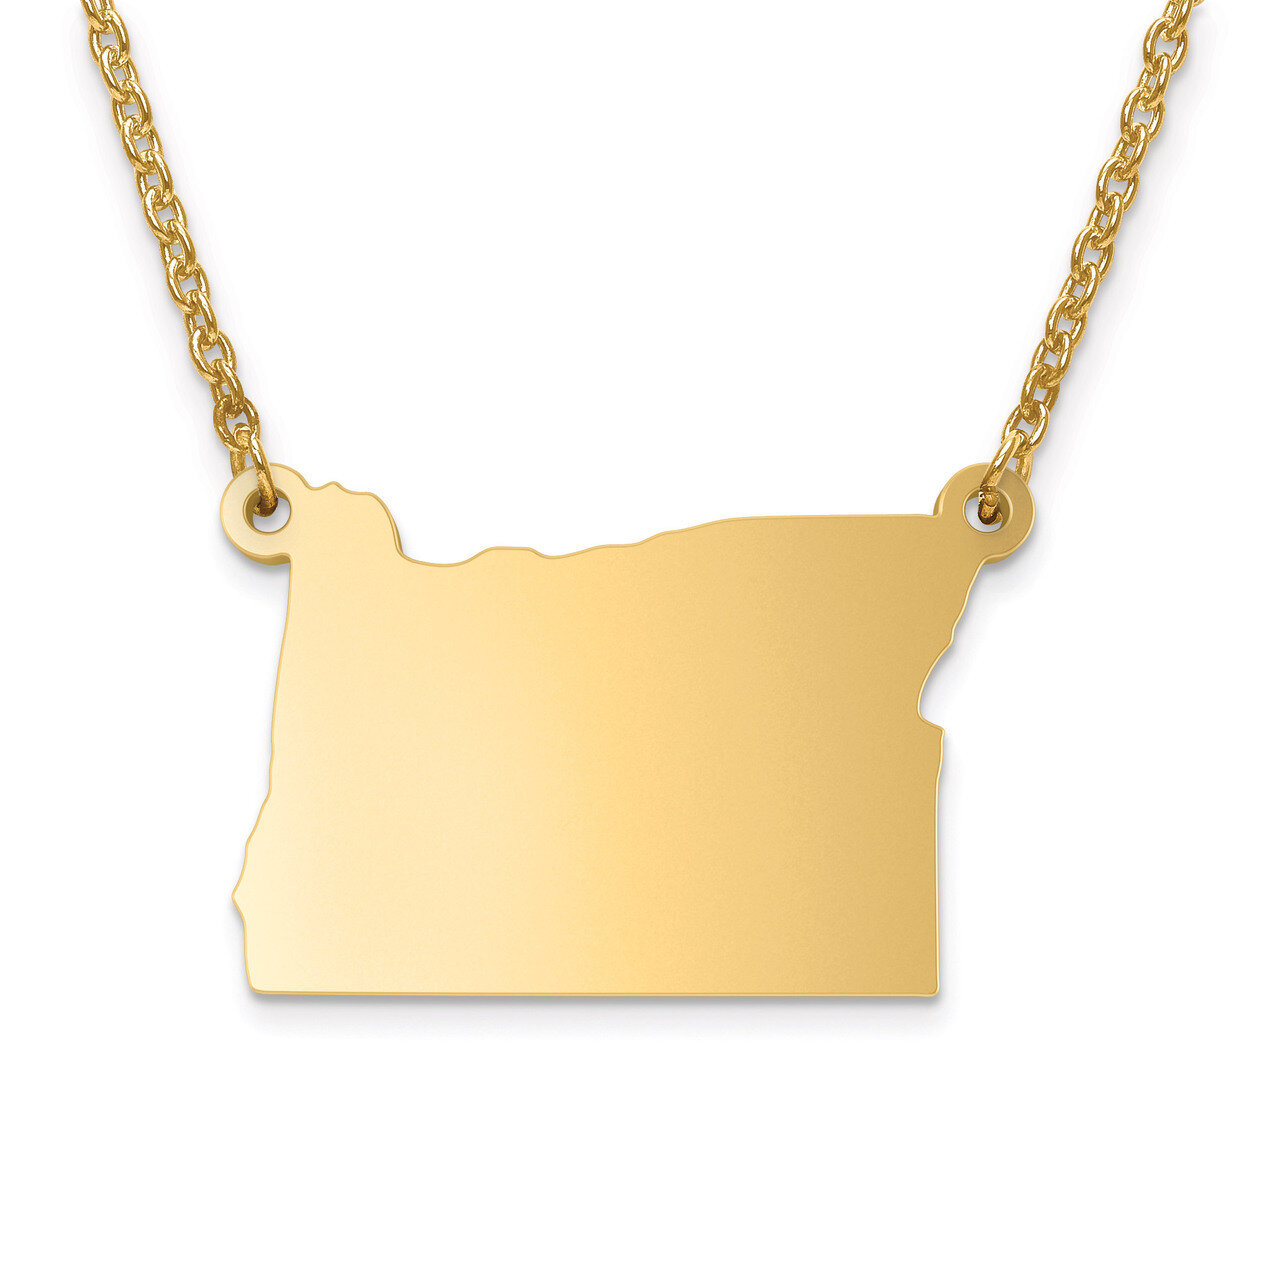 Oregon State Pendant with Chain Engravable Gold-plated on Sterling Silver